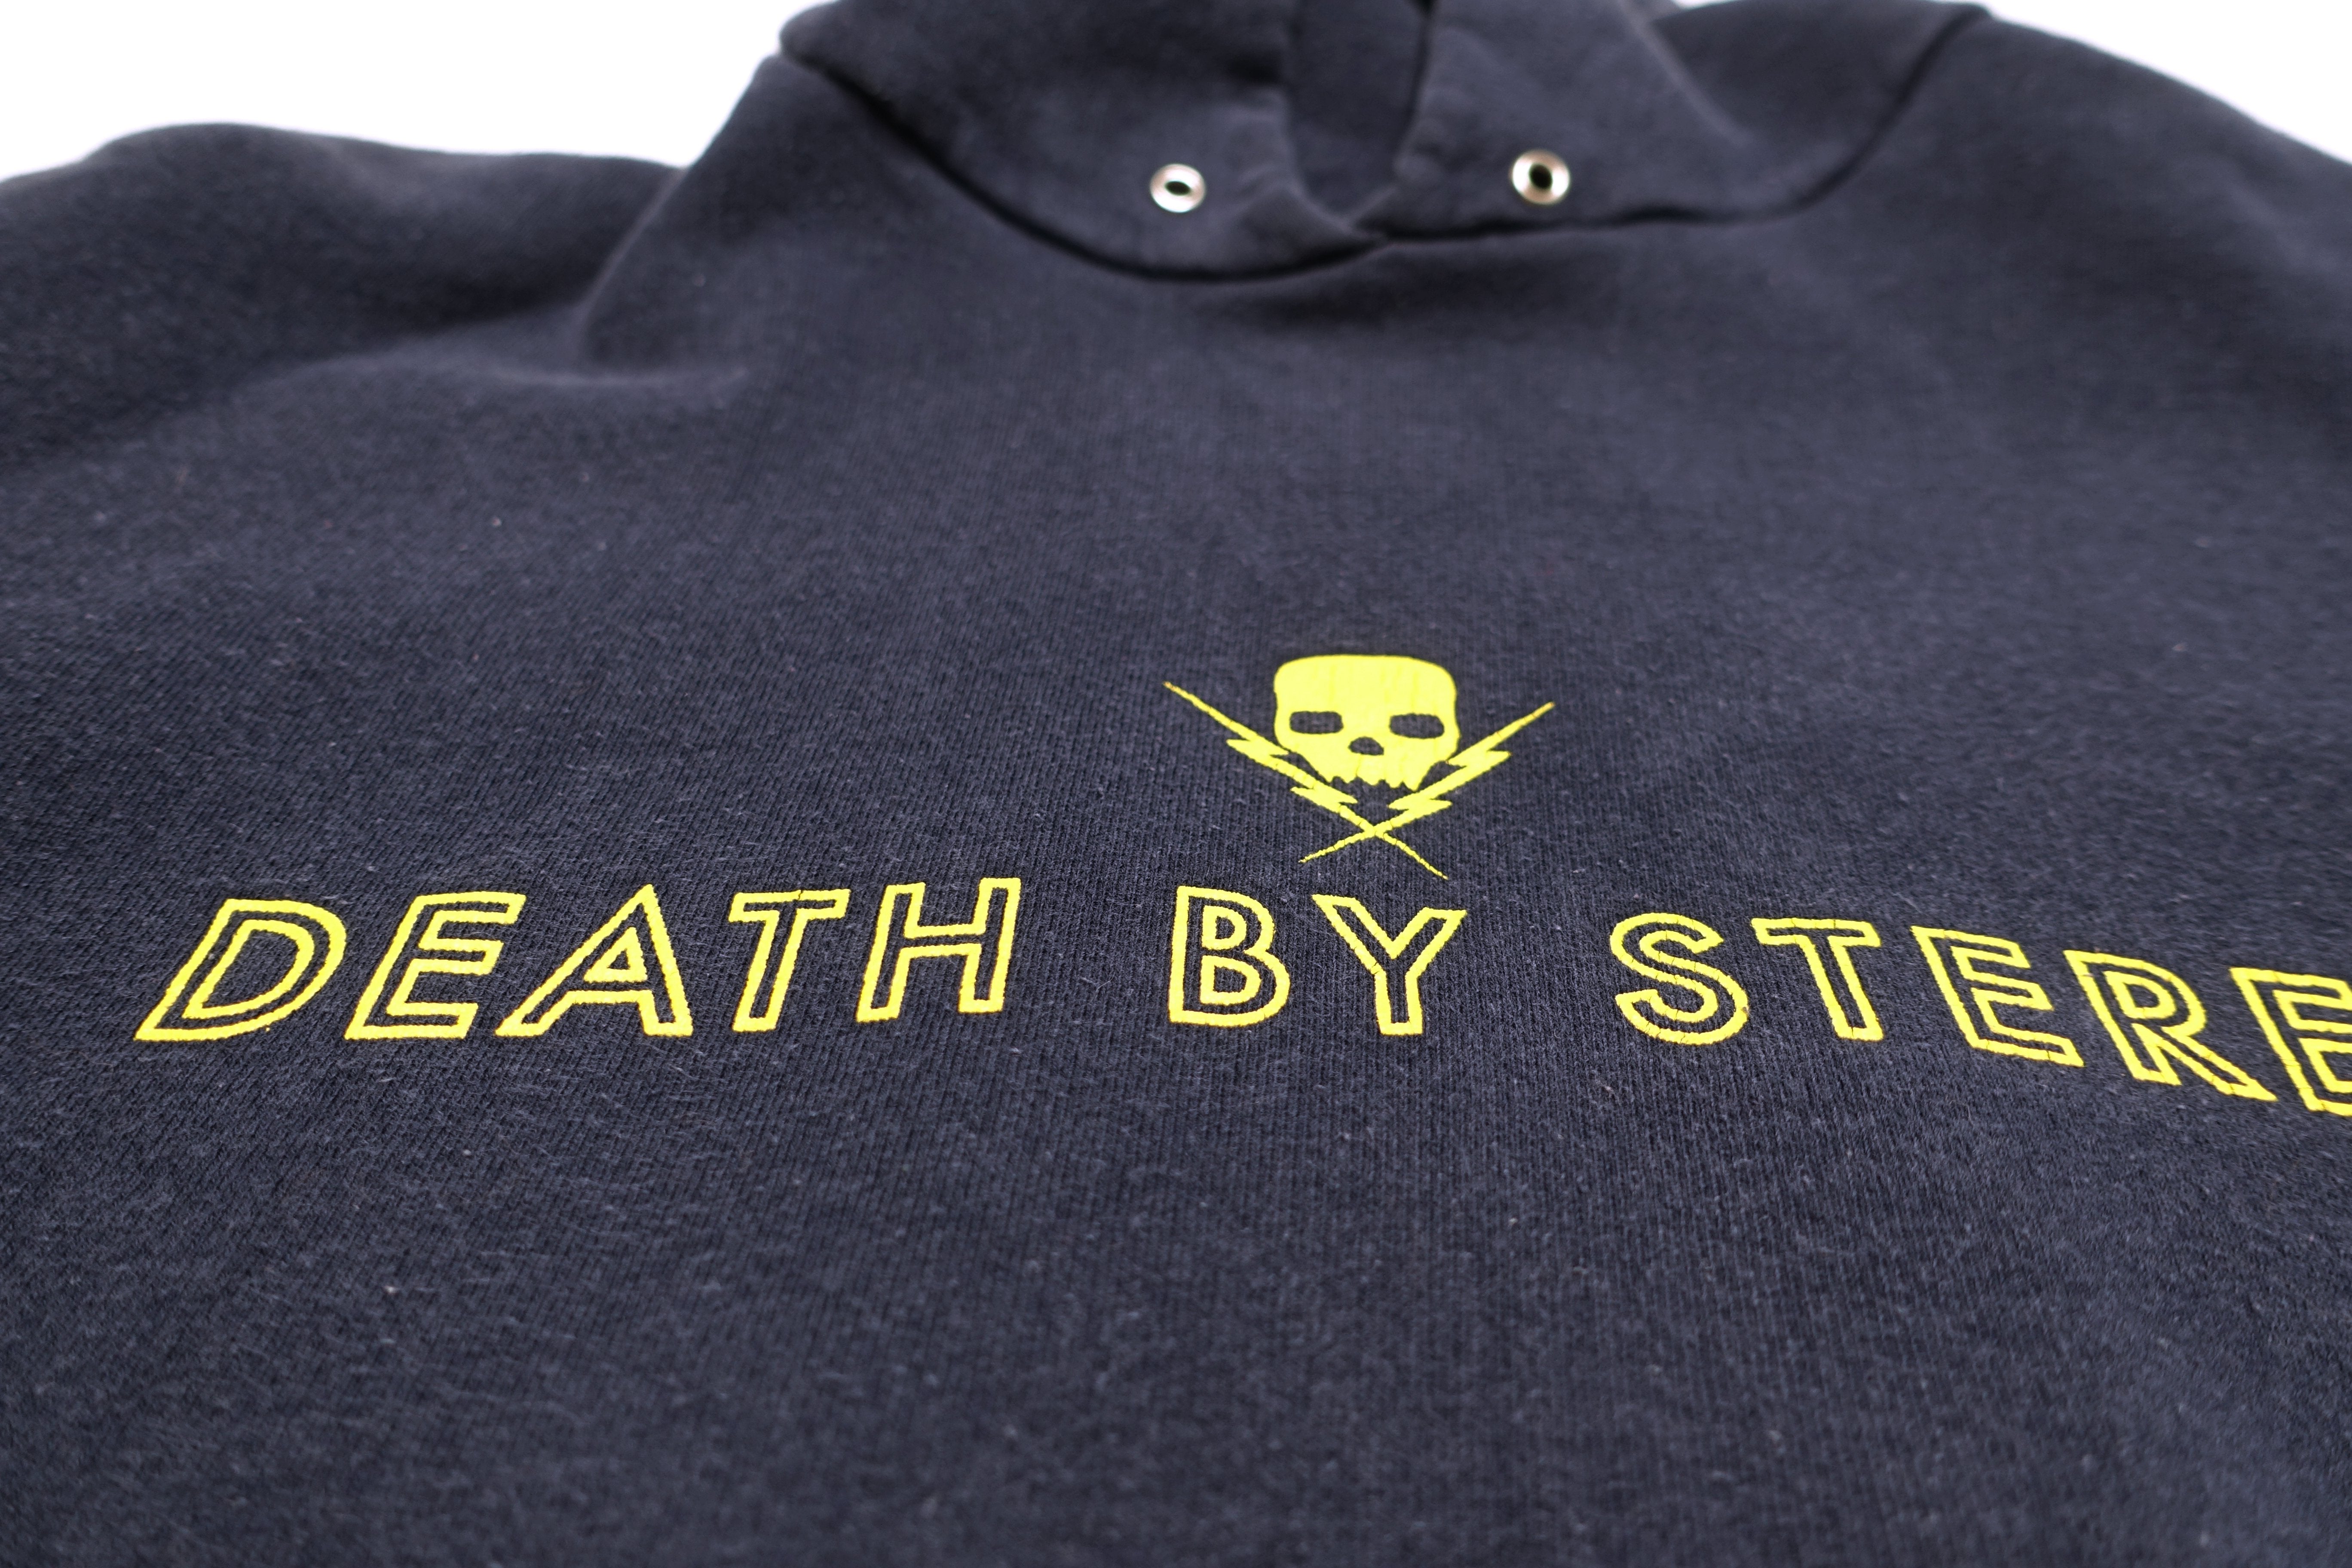 Death By Stereo ‎– Day Of The Death 2001 Tour Hooded Sweat Shirt Size XL